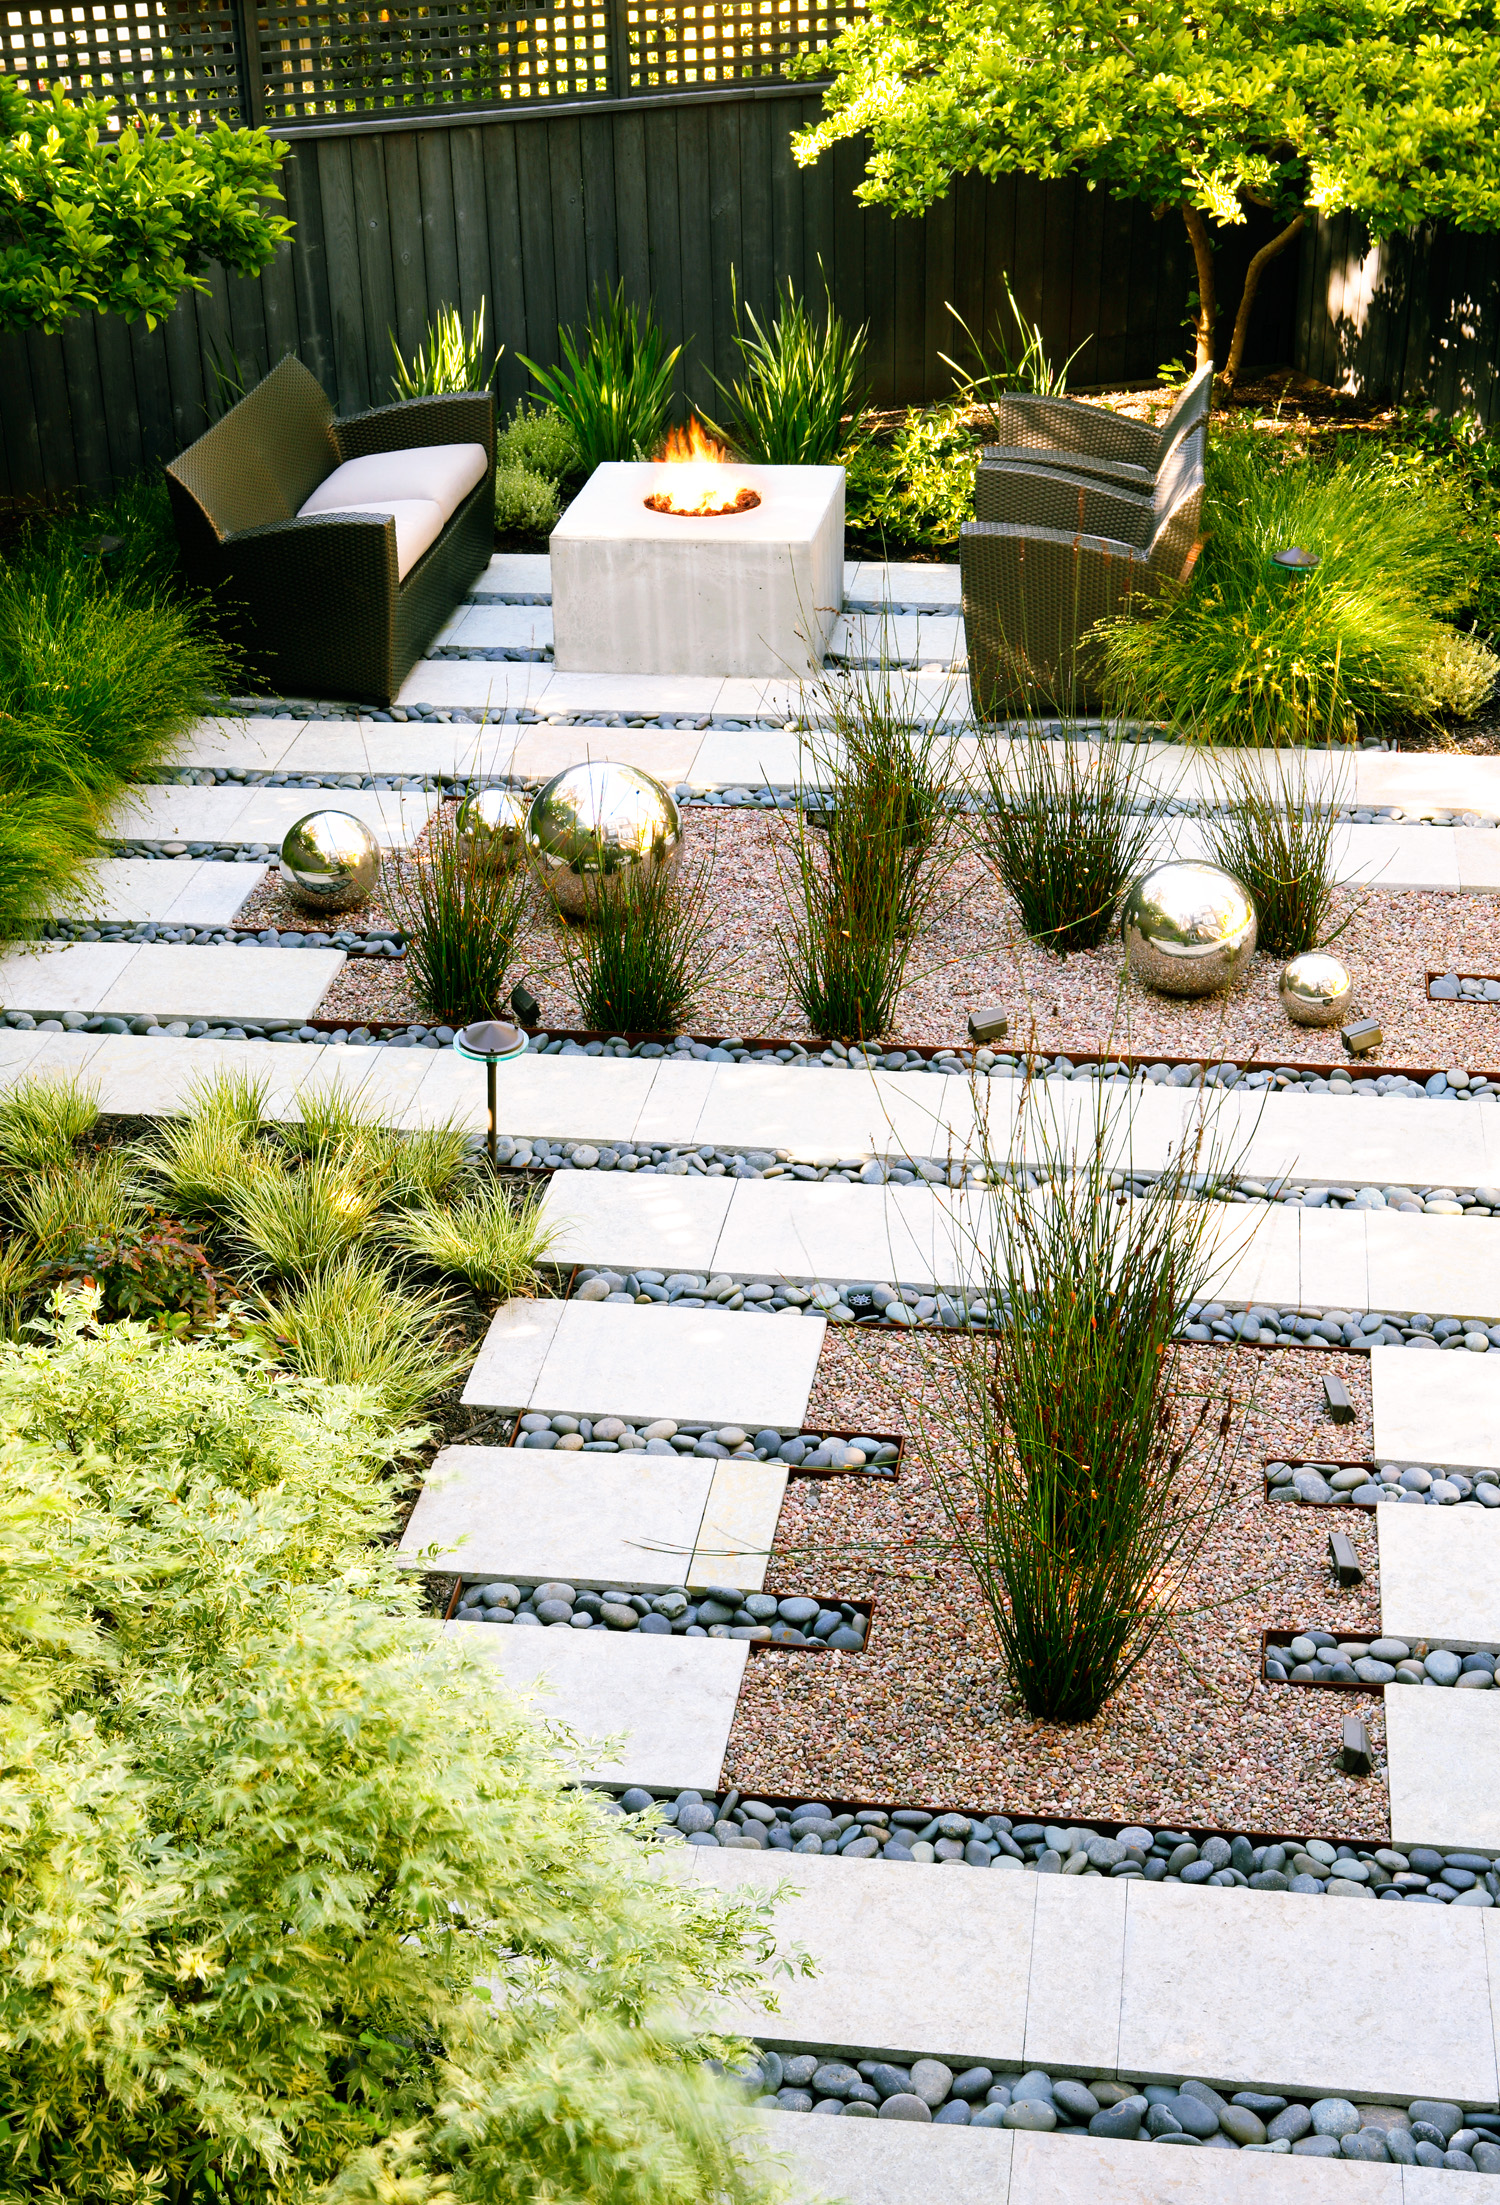 Is your yard or garden small on space? Get big ideas for ...